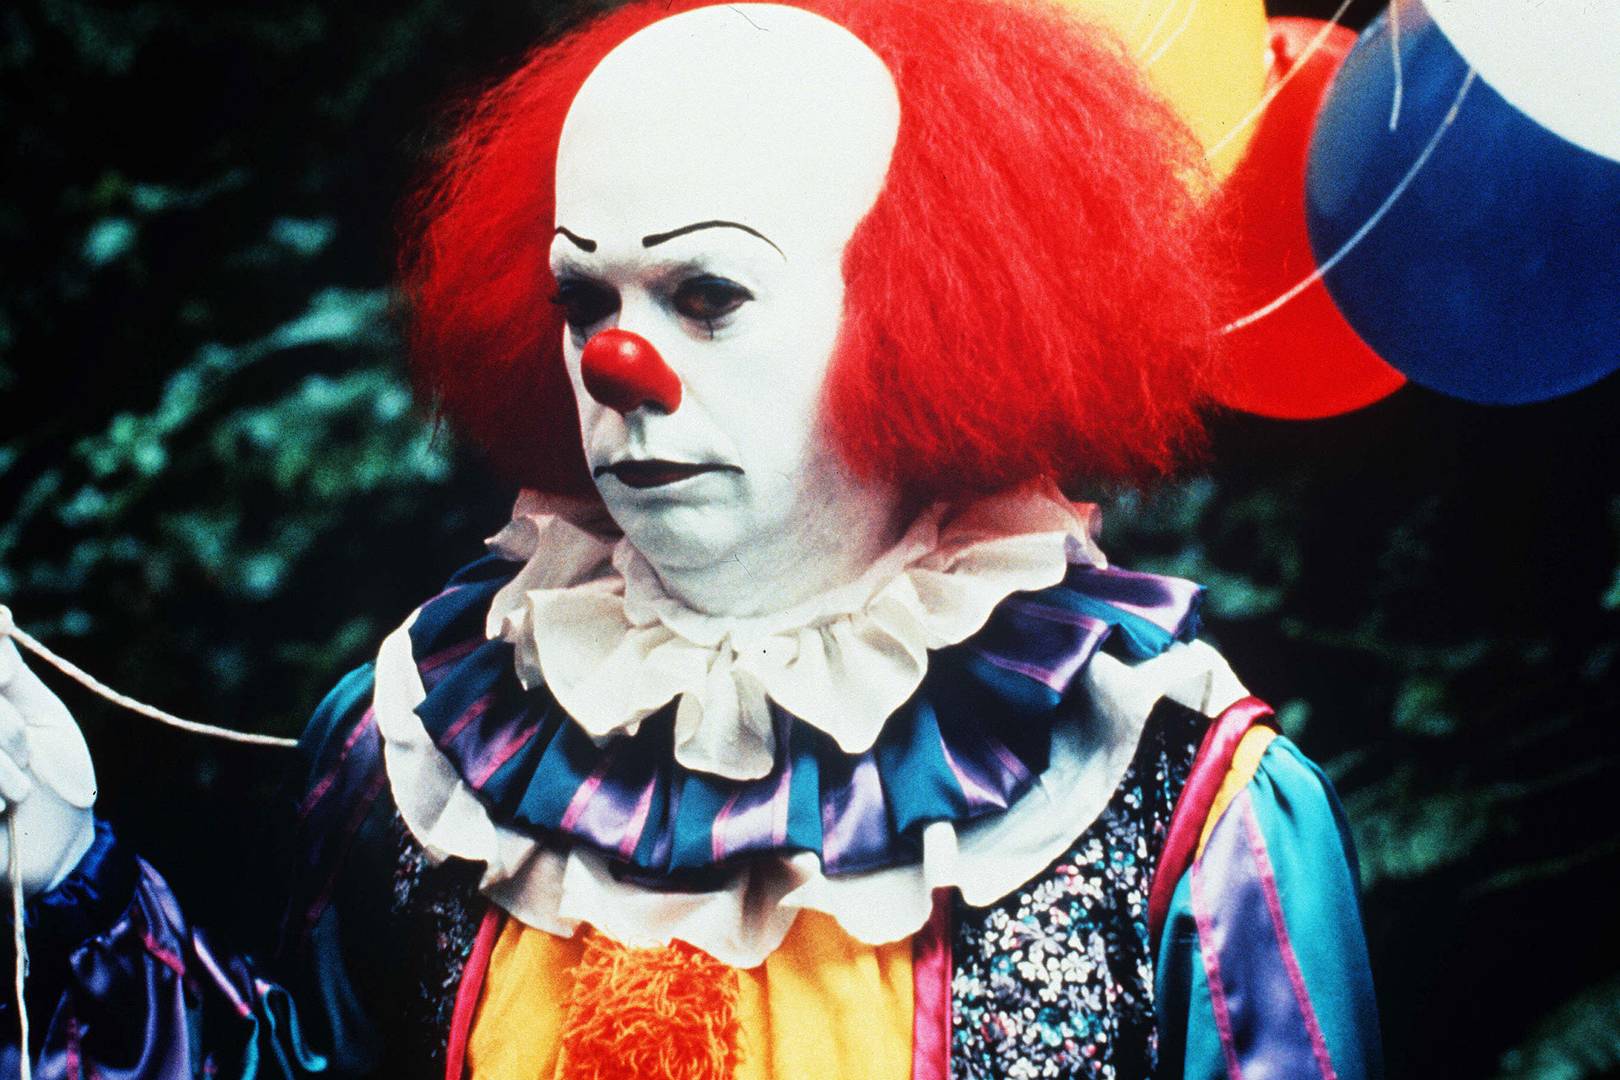 It film review, just how scary is Pennywise in the Stephen King horror ...